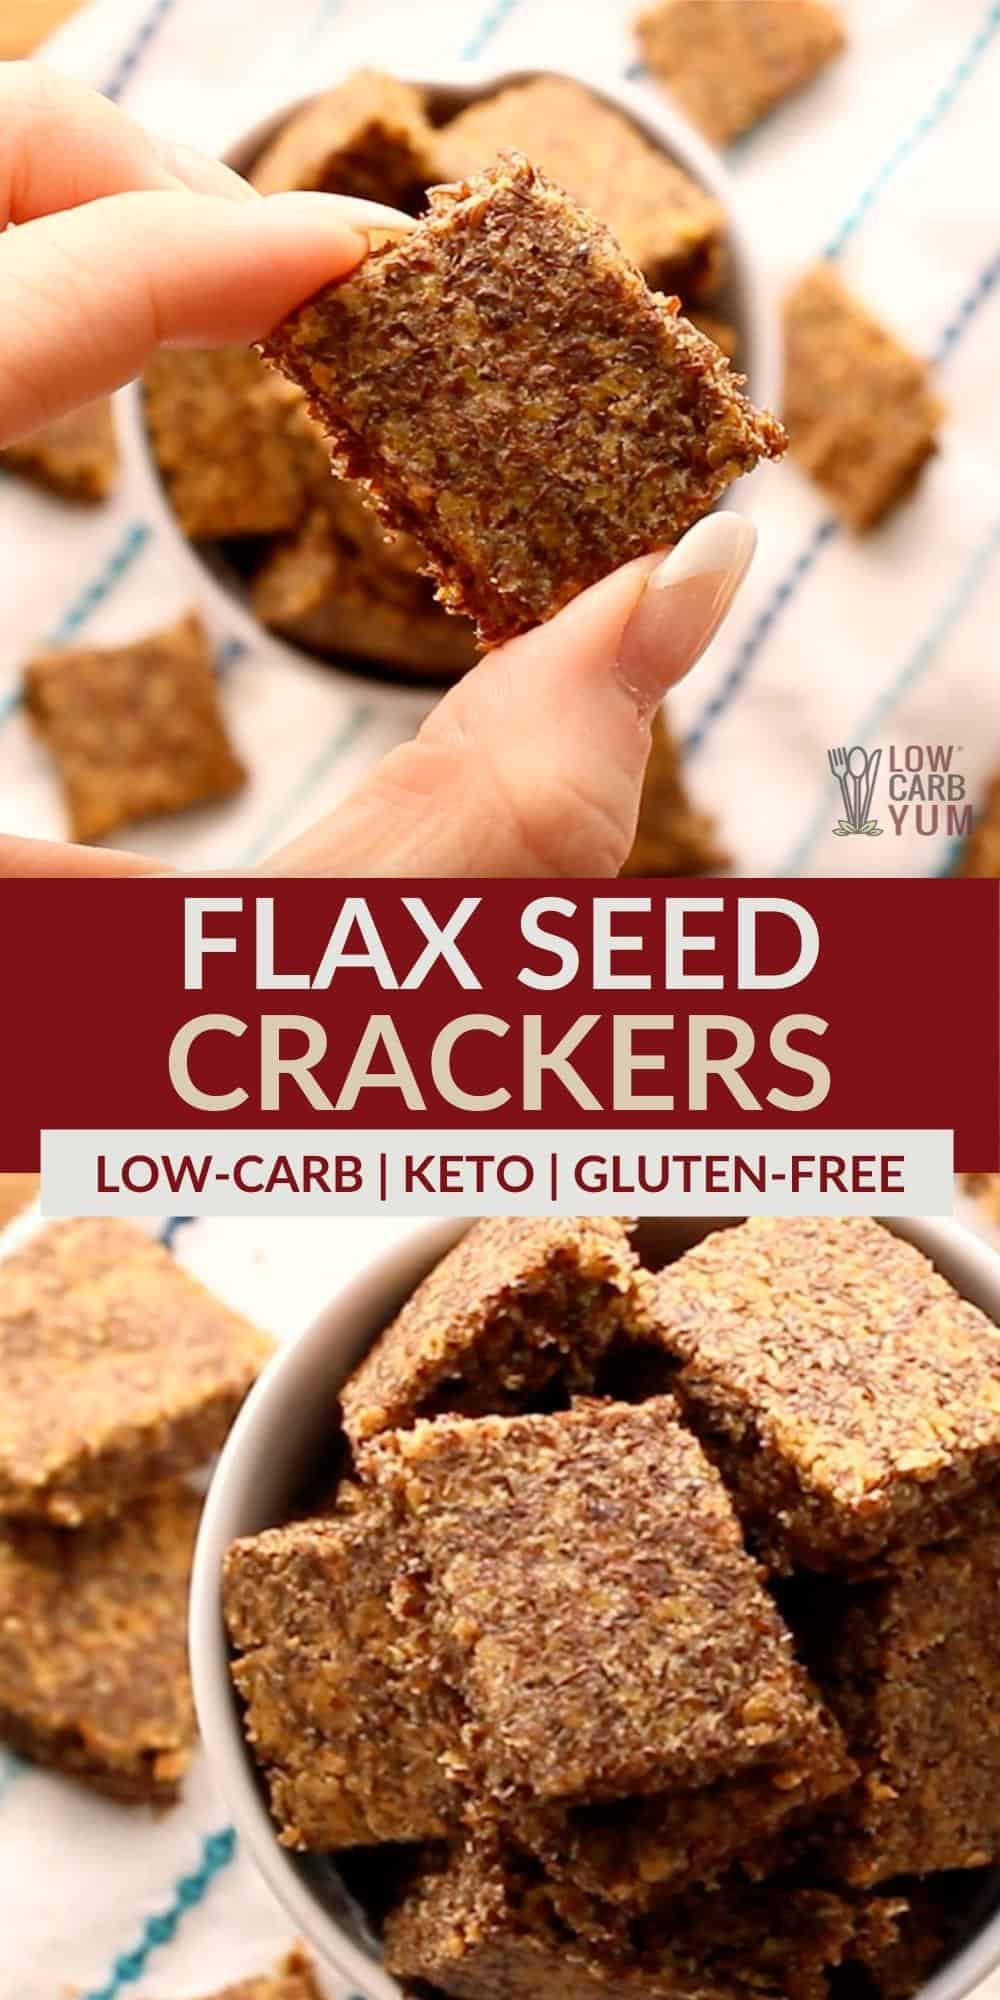 flax seed crackers pinterest image.